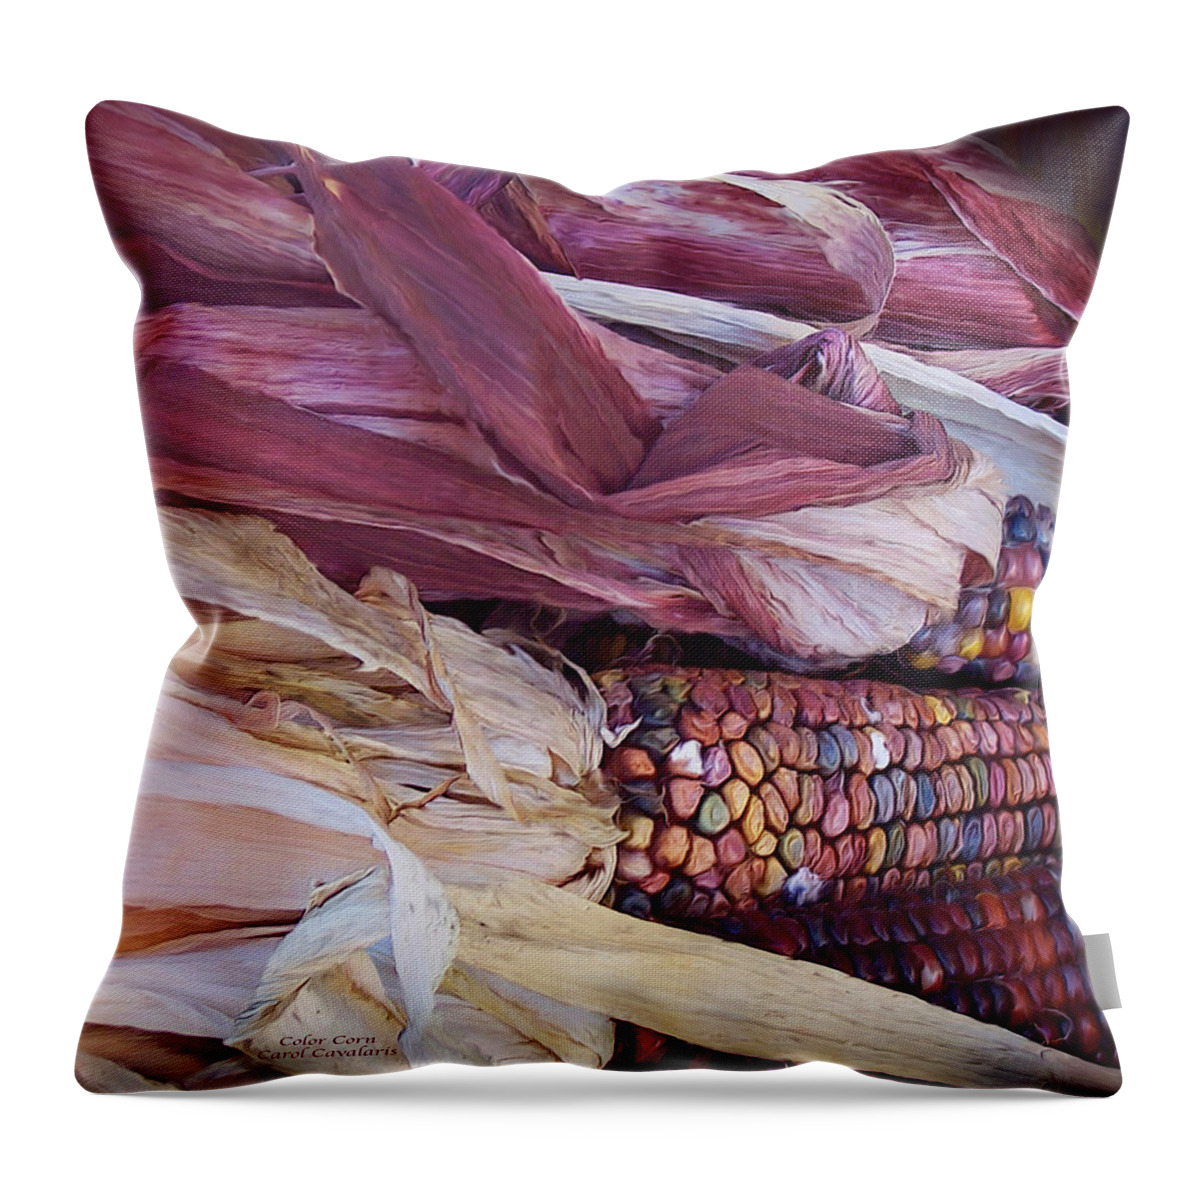 Colorful Corn Throw Pillow featuring the mixed media Color Corn by Carol Cavalaris